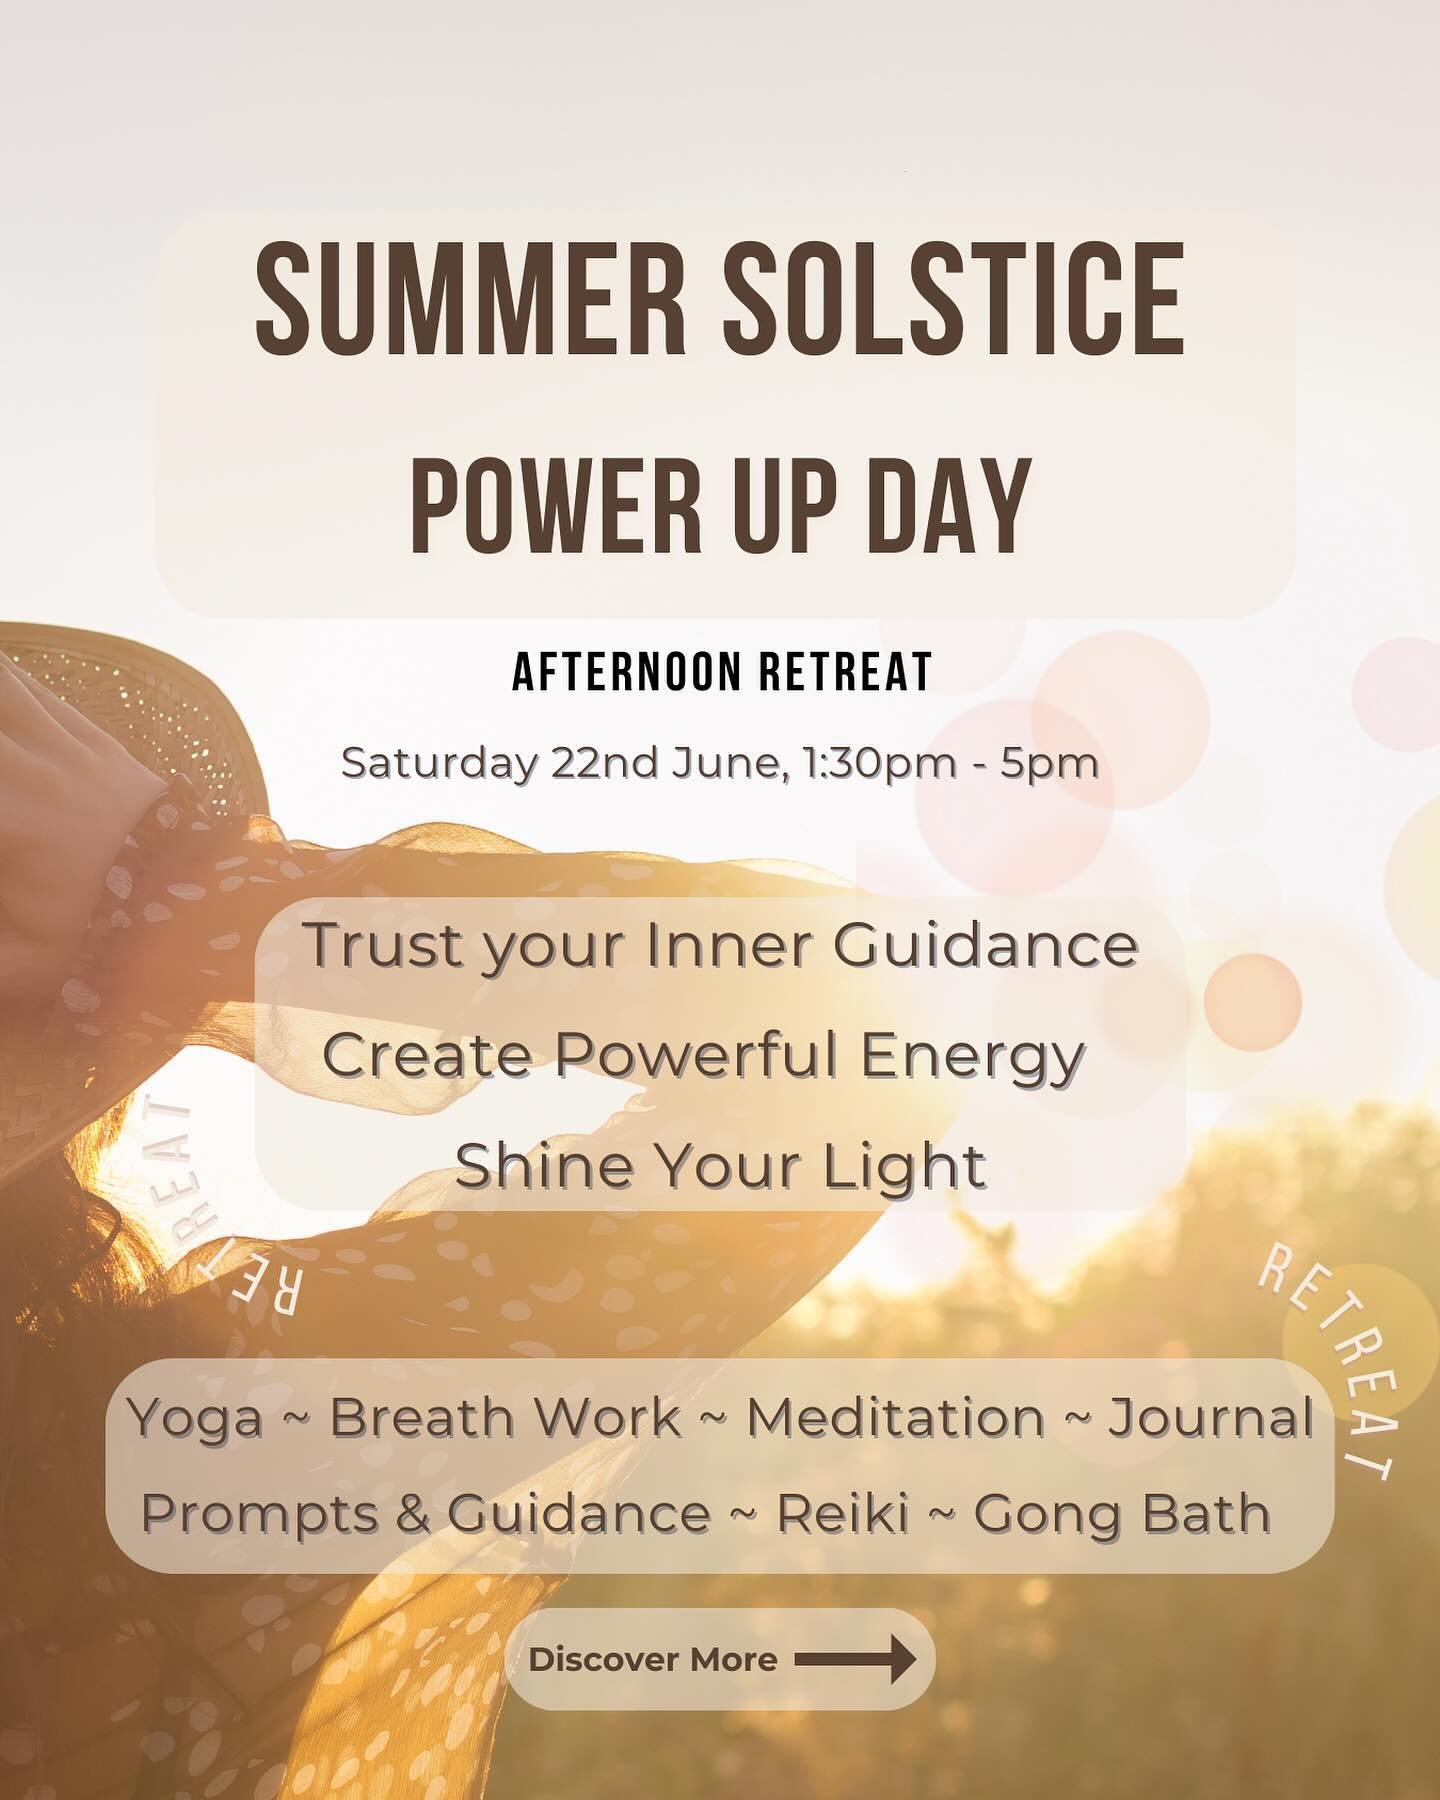 ☀️☀️☀️☀️☀️  Summer Solstice POWER - UP

Trust your Inner Guidance, Create Powerful Energy, Shine Your Light

Saturday 22nd June
1:30pm - 5pm. Arrive from 1:15pm

SHADWELL STUDIO
☀️☀️☀️☀️☀️☀️☀️☀️☀️ &mdash;&mdash;&mdash;&mdash;

Yoga Flow
Move stagnant